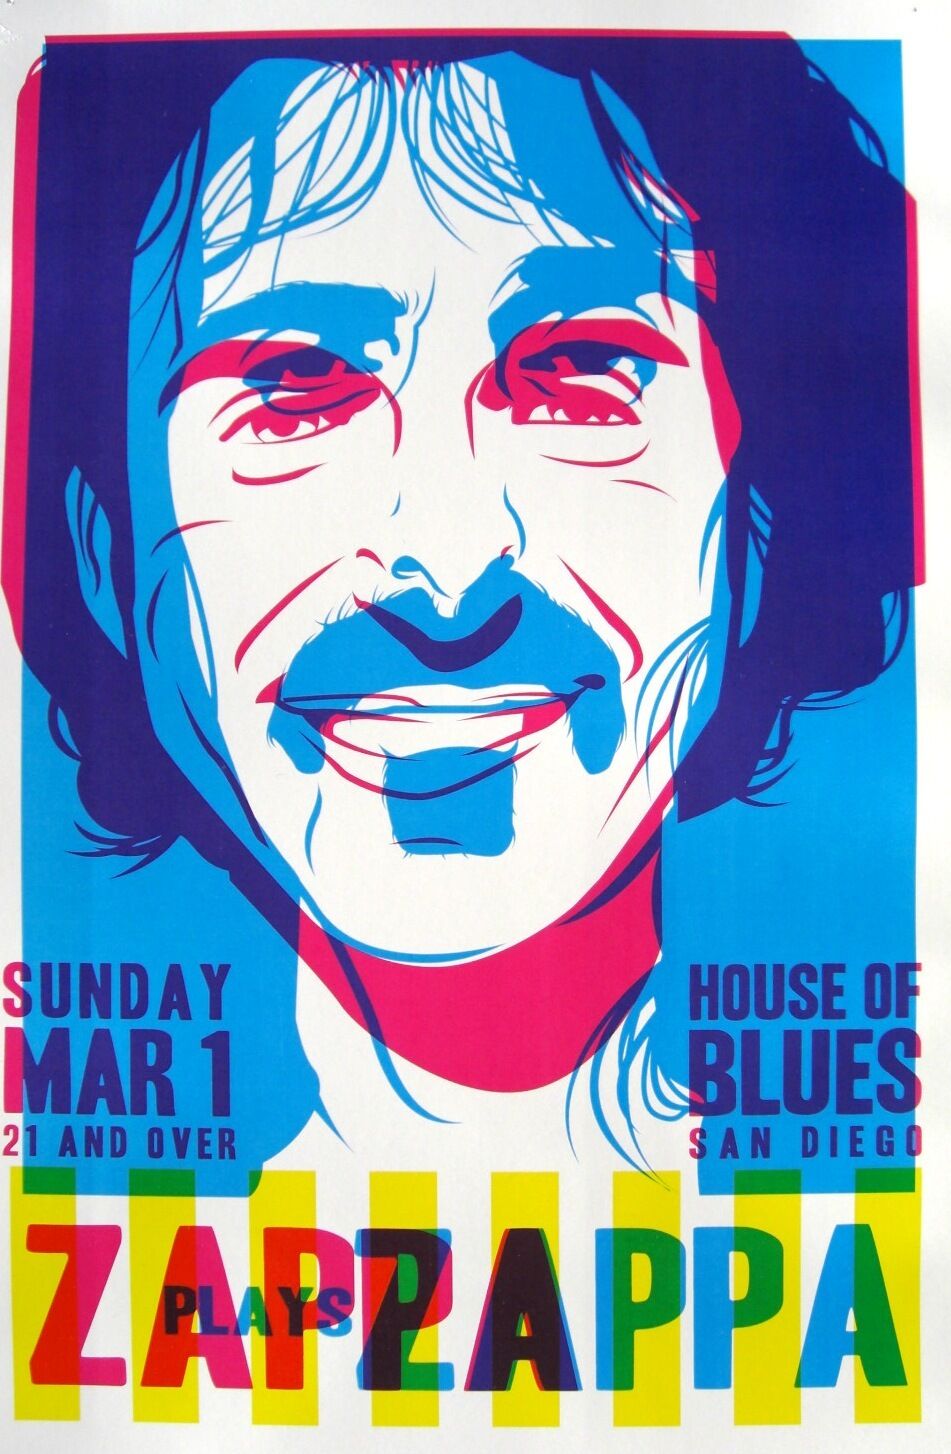 Zappa Plays Zappa San Diego 2009 Concert Tour Poster - Frank Over Dweezil's Face